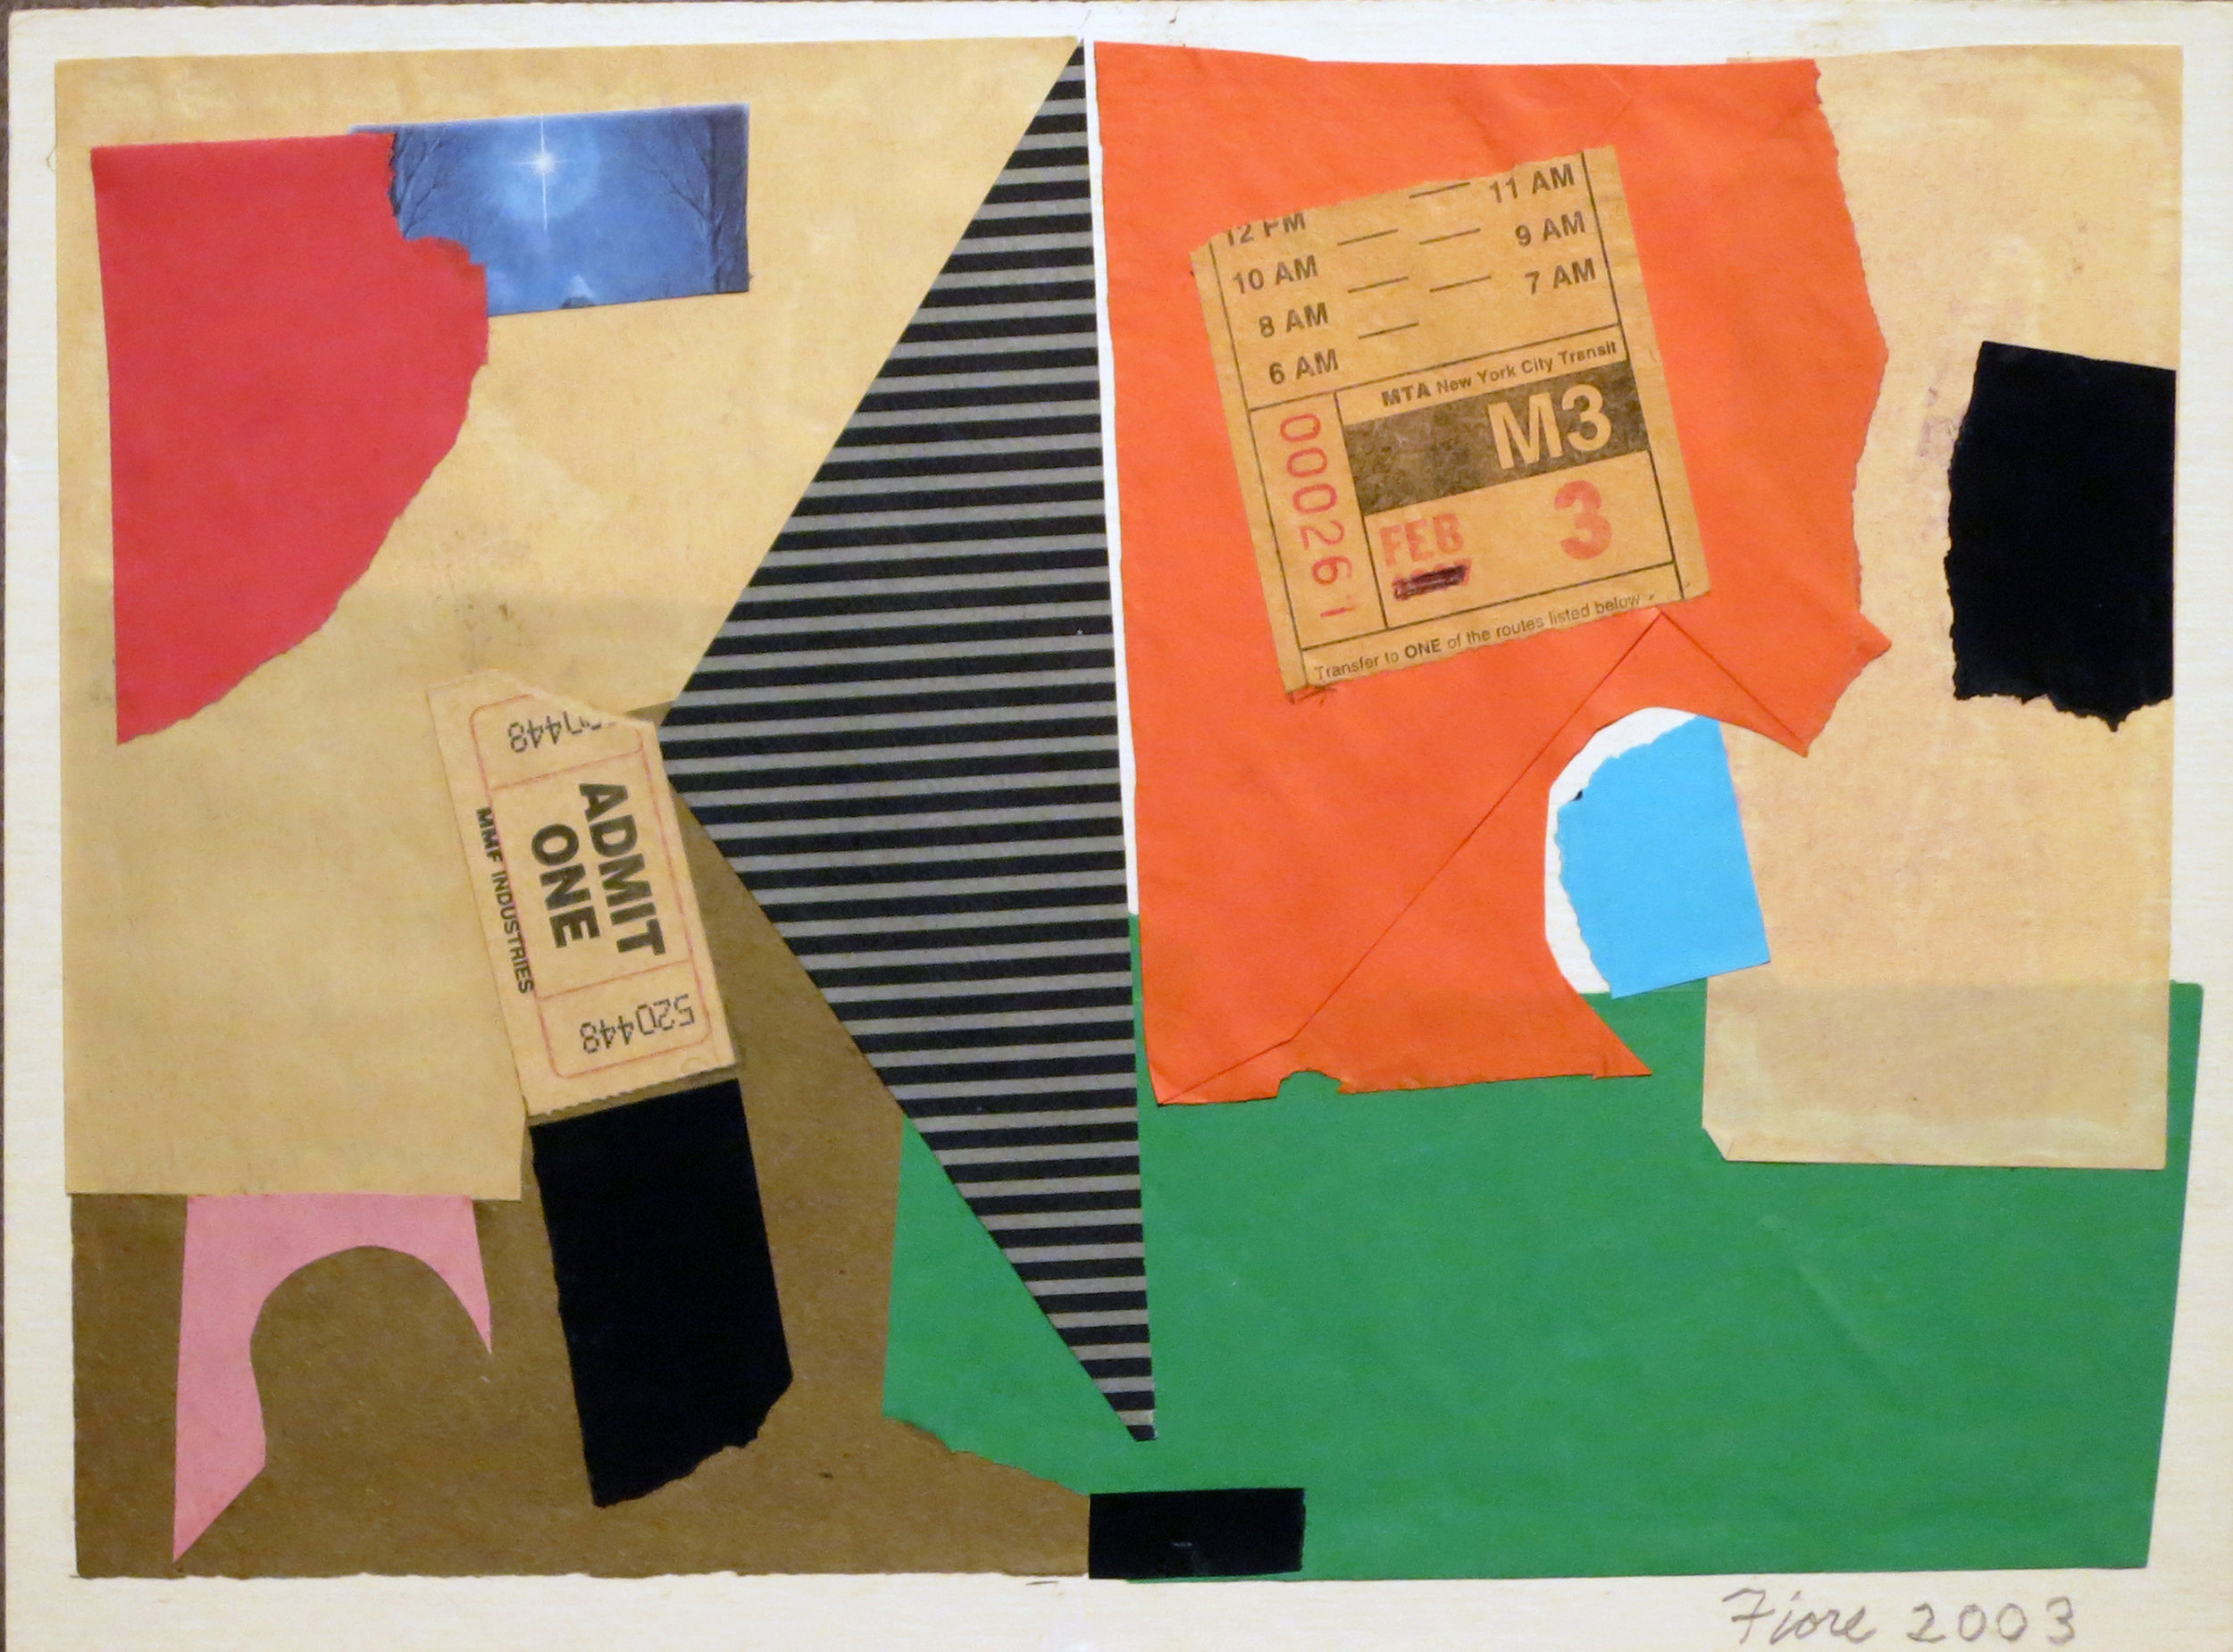 Abstract collage with envelopes, paper, and ticket stub